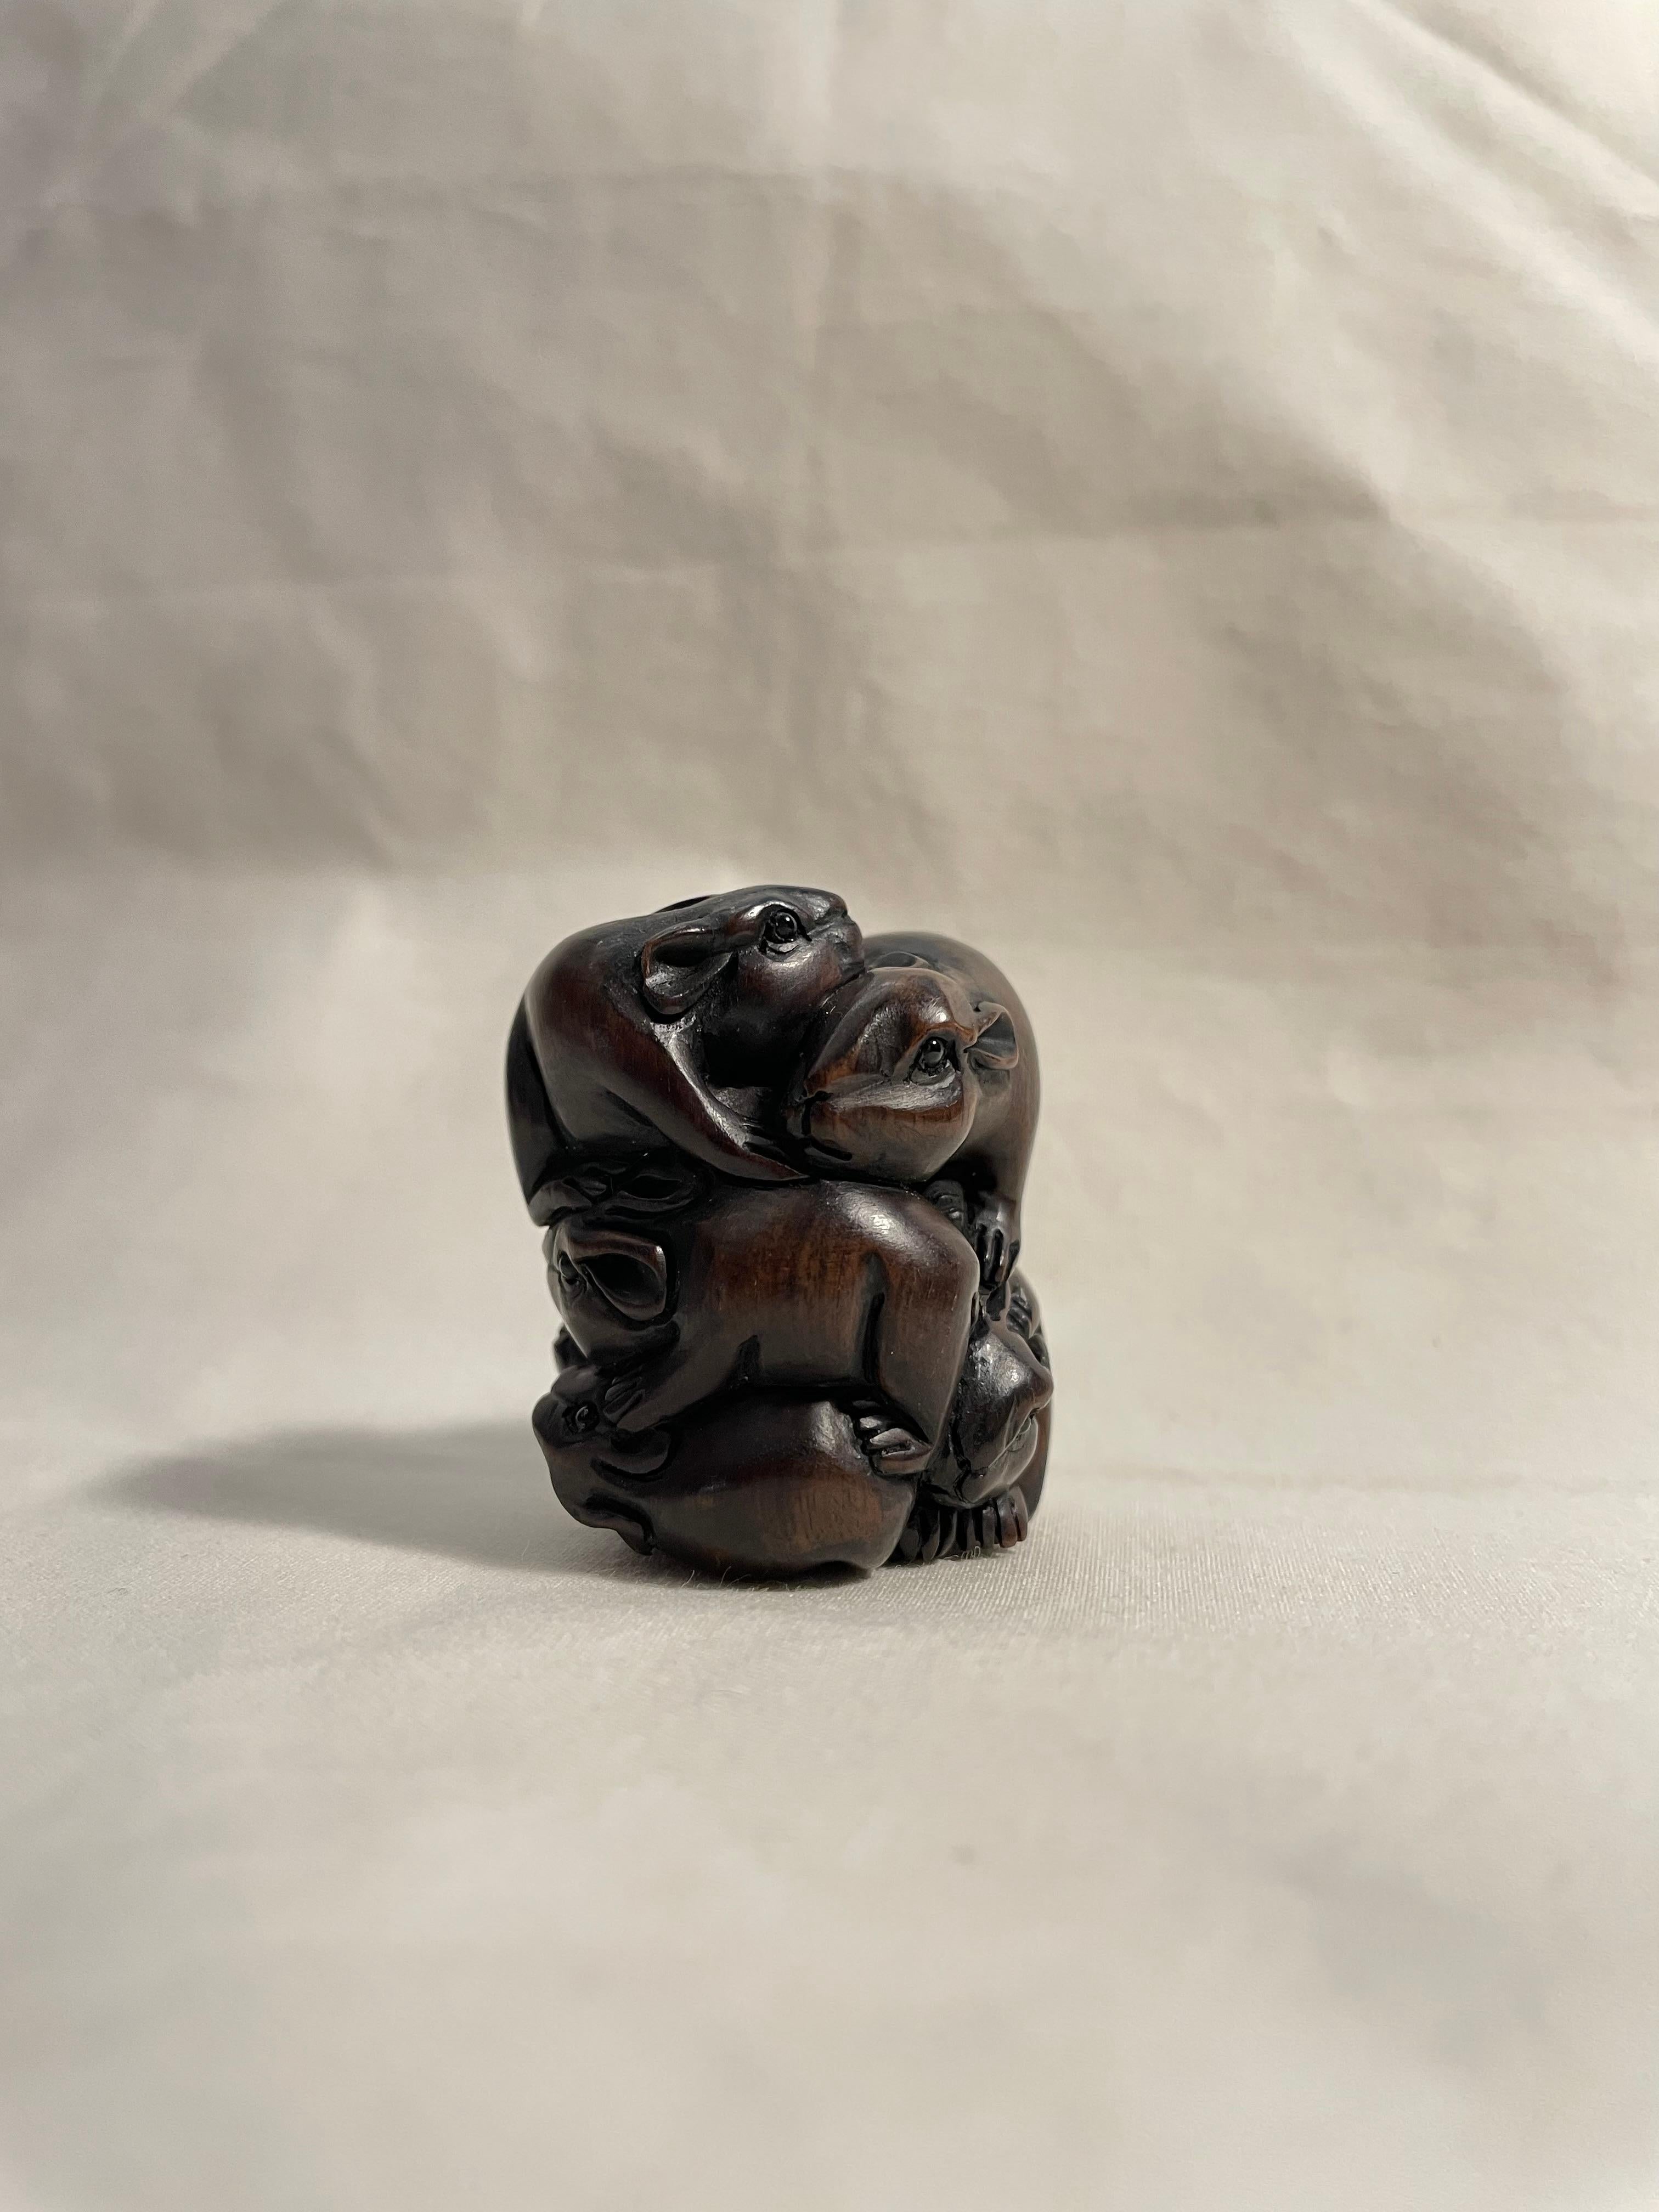 This is an antique netsuke made in Japan around Showa period 1950s.
This netsuke was made by a netsuke artist 'Shushi' (you can find his signature on the bottom of this netsuke.)
Netsuke is a miniature sculpture, originating in 17th century